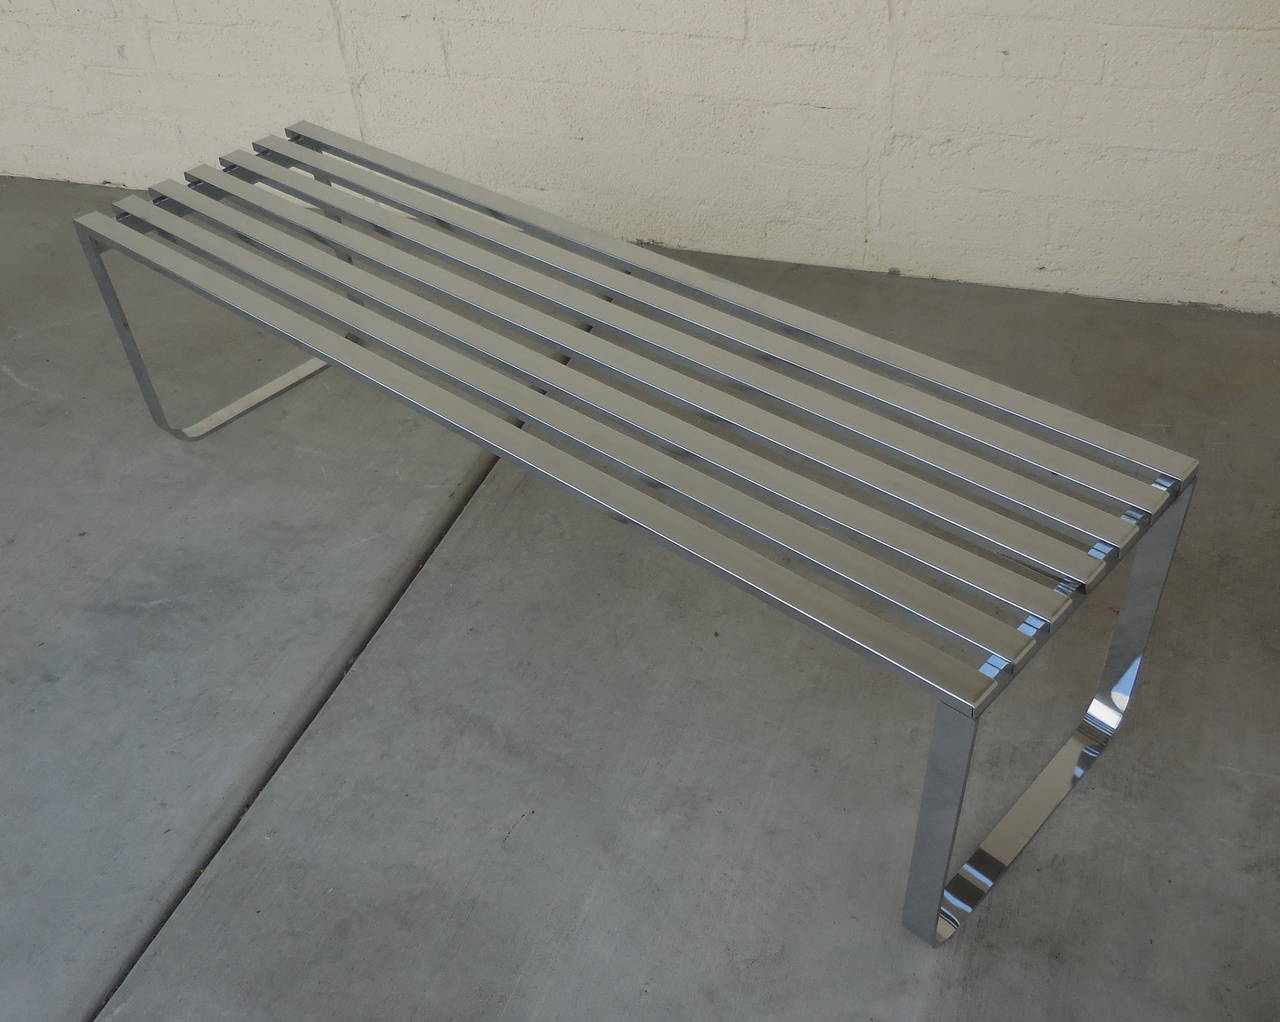 A long chrome-plated steel slatted bench designed by Milo Baughman from the 1970s. This bench can also be used as a coffee table and is the perfect size to,
sit at the foot of a bed.